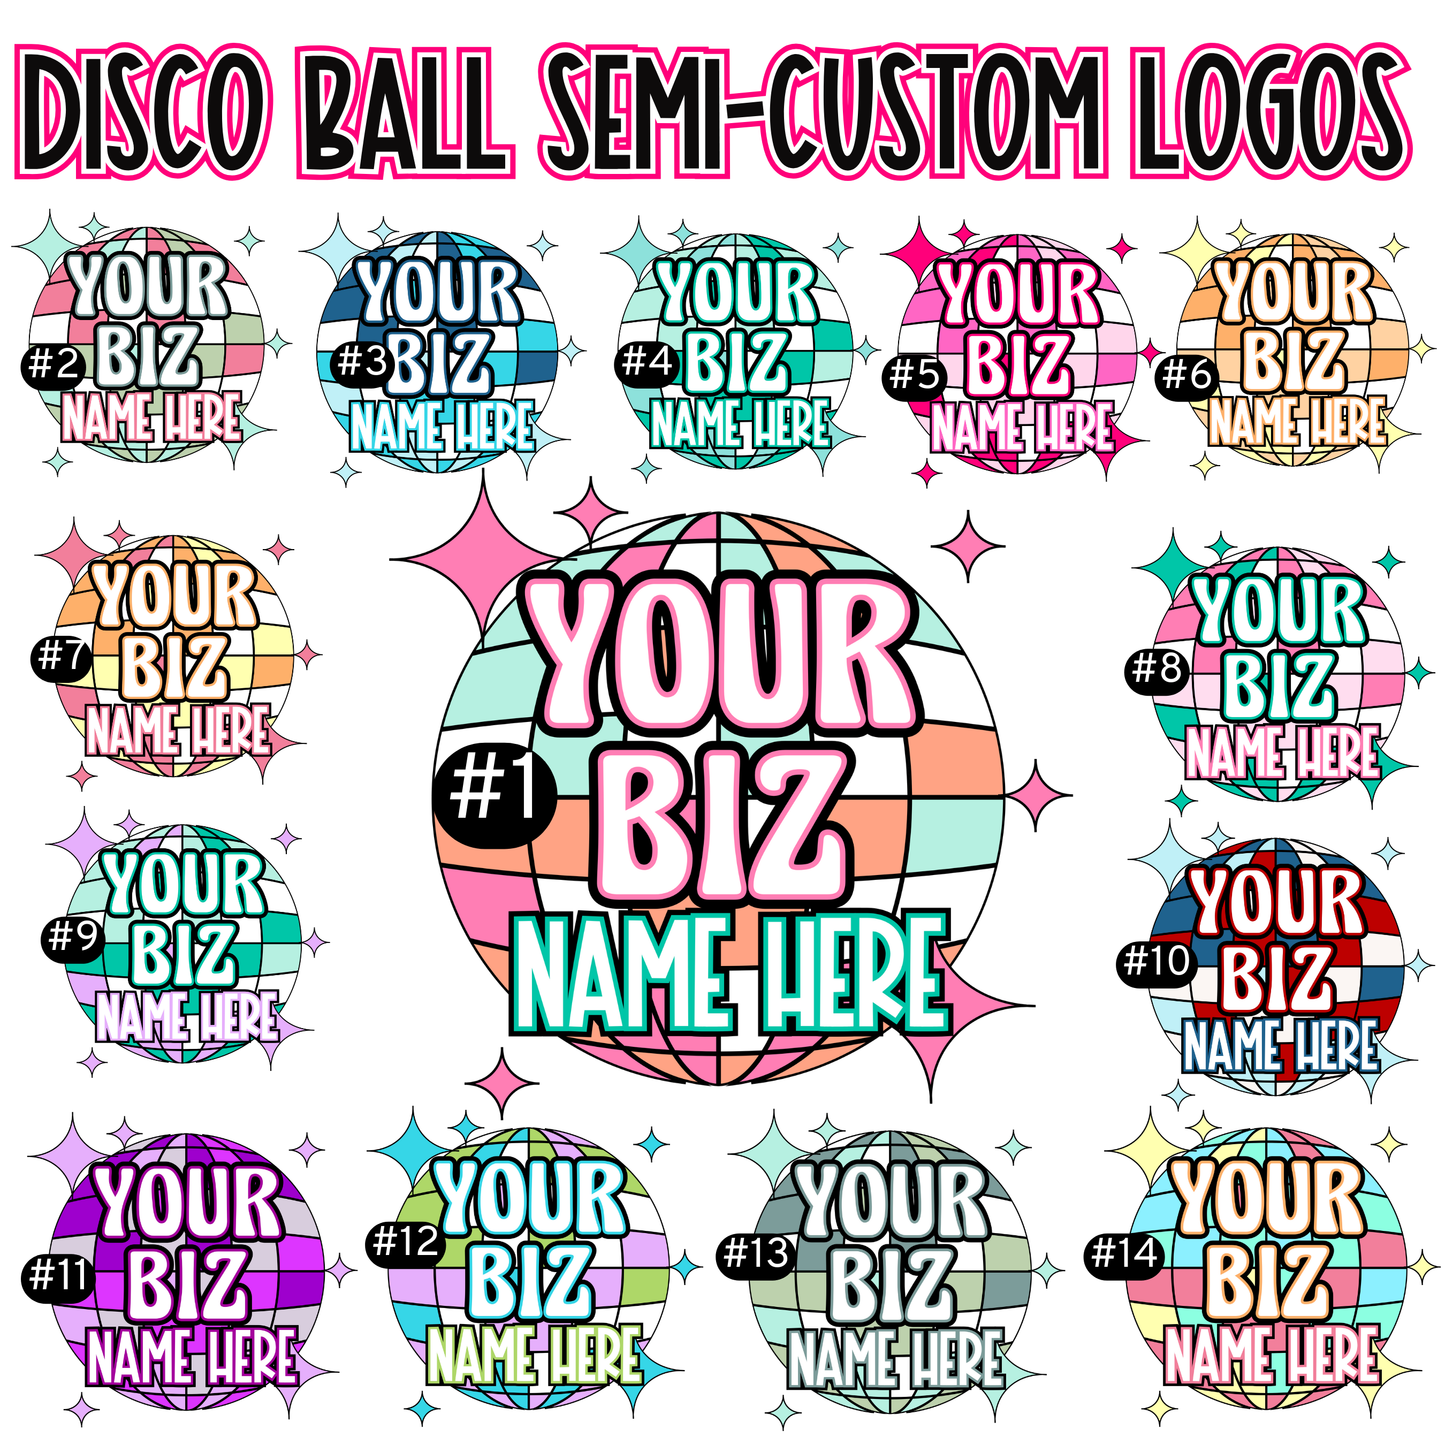 Disco Ball Logo Small Business Bundle | Full Color Printed Vinyl Stickers | Thank You Cards